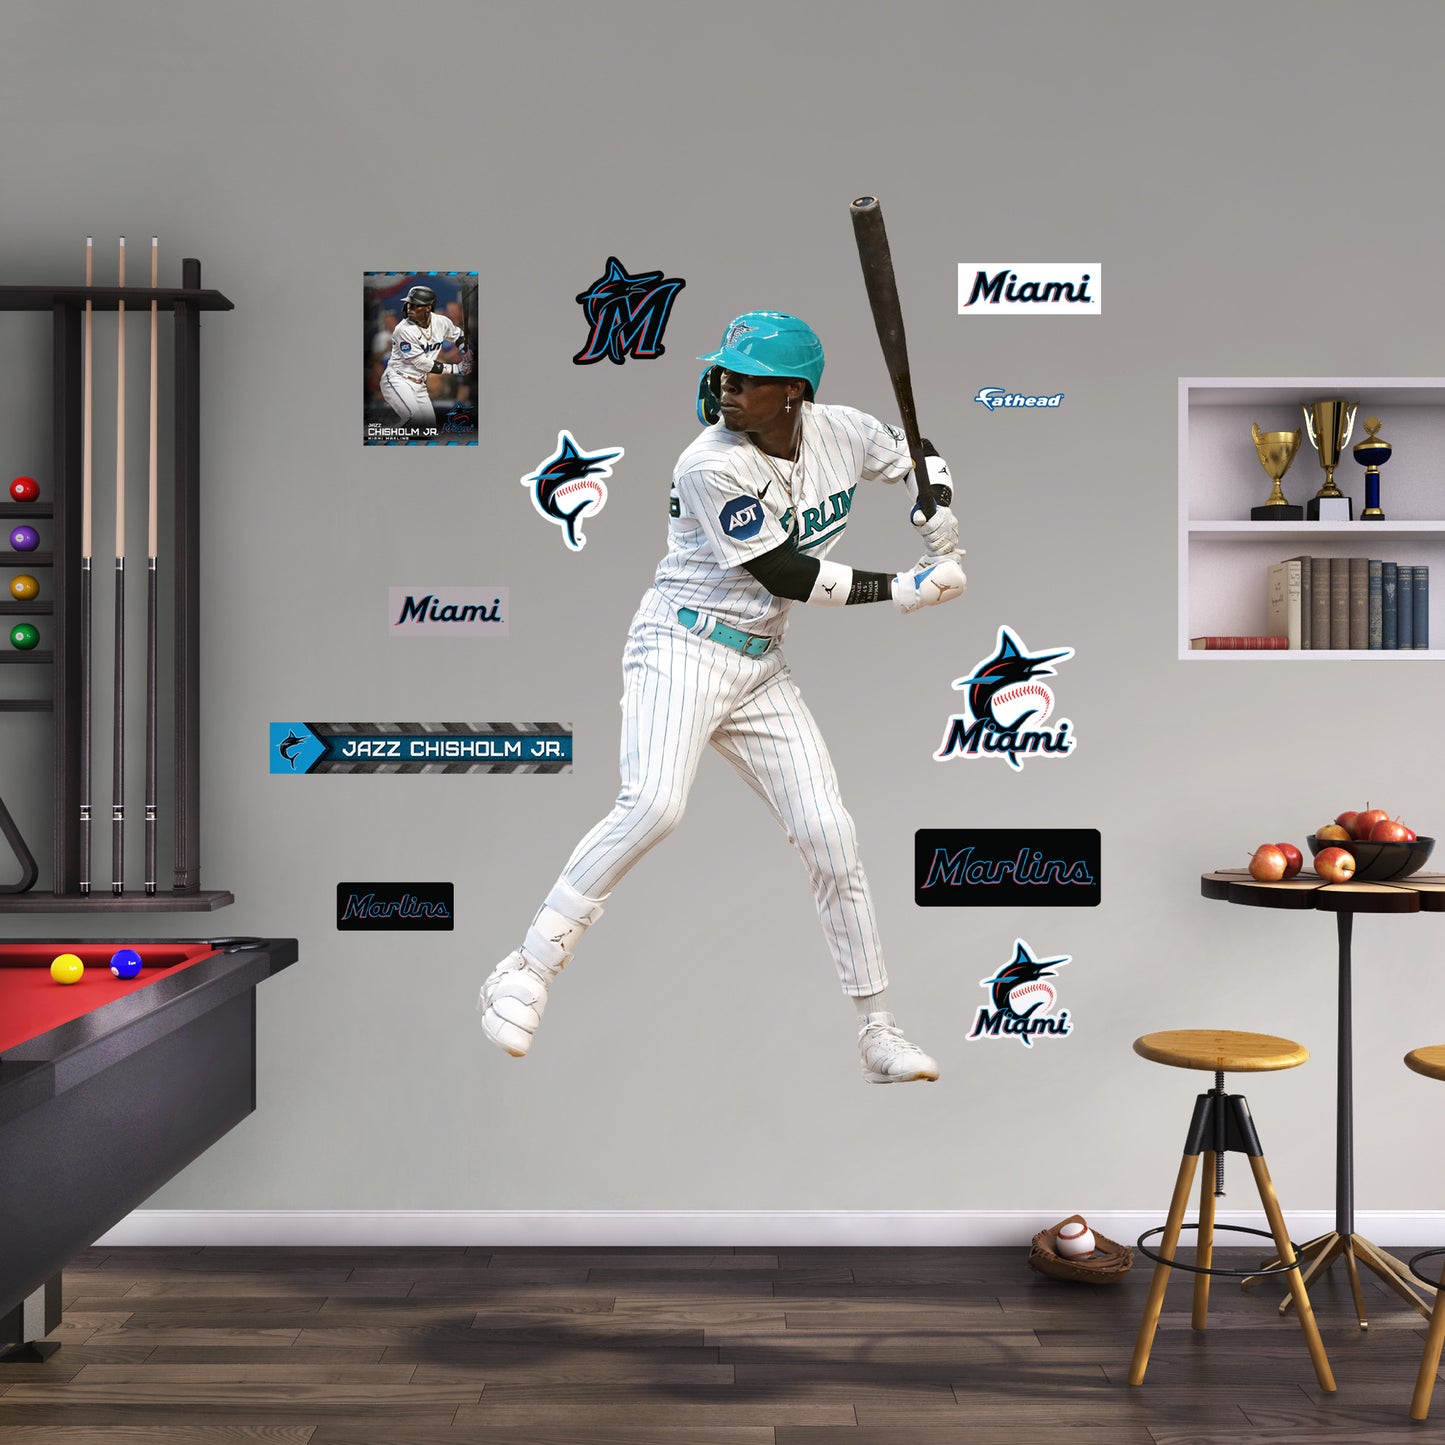 Miami Marlins on X: New wallpapers to get you into that throwback